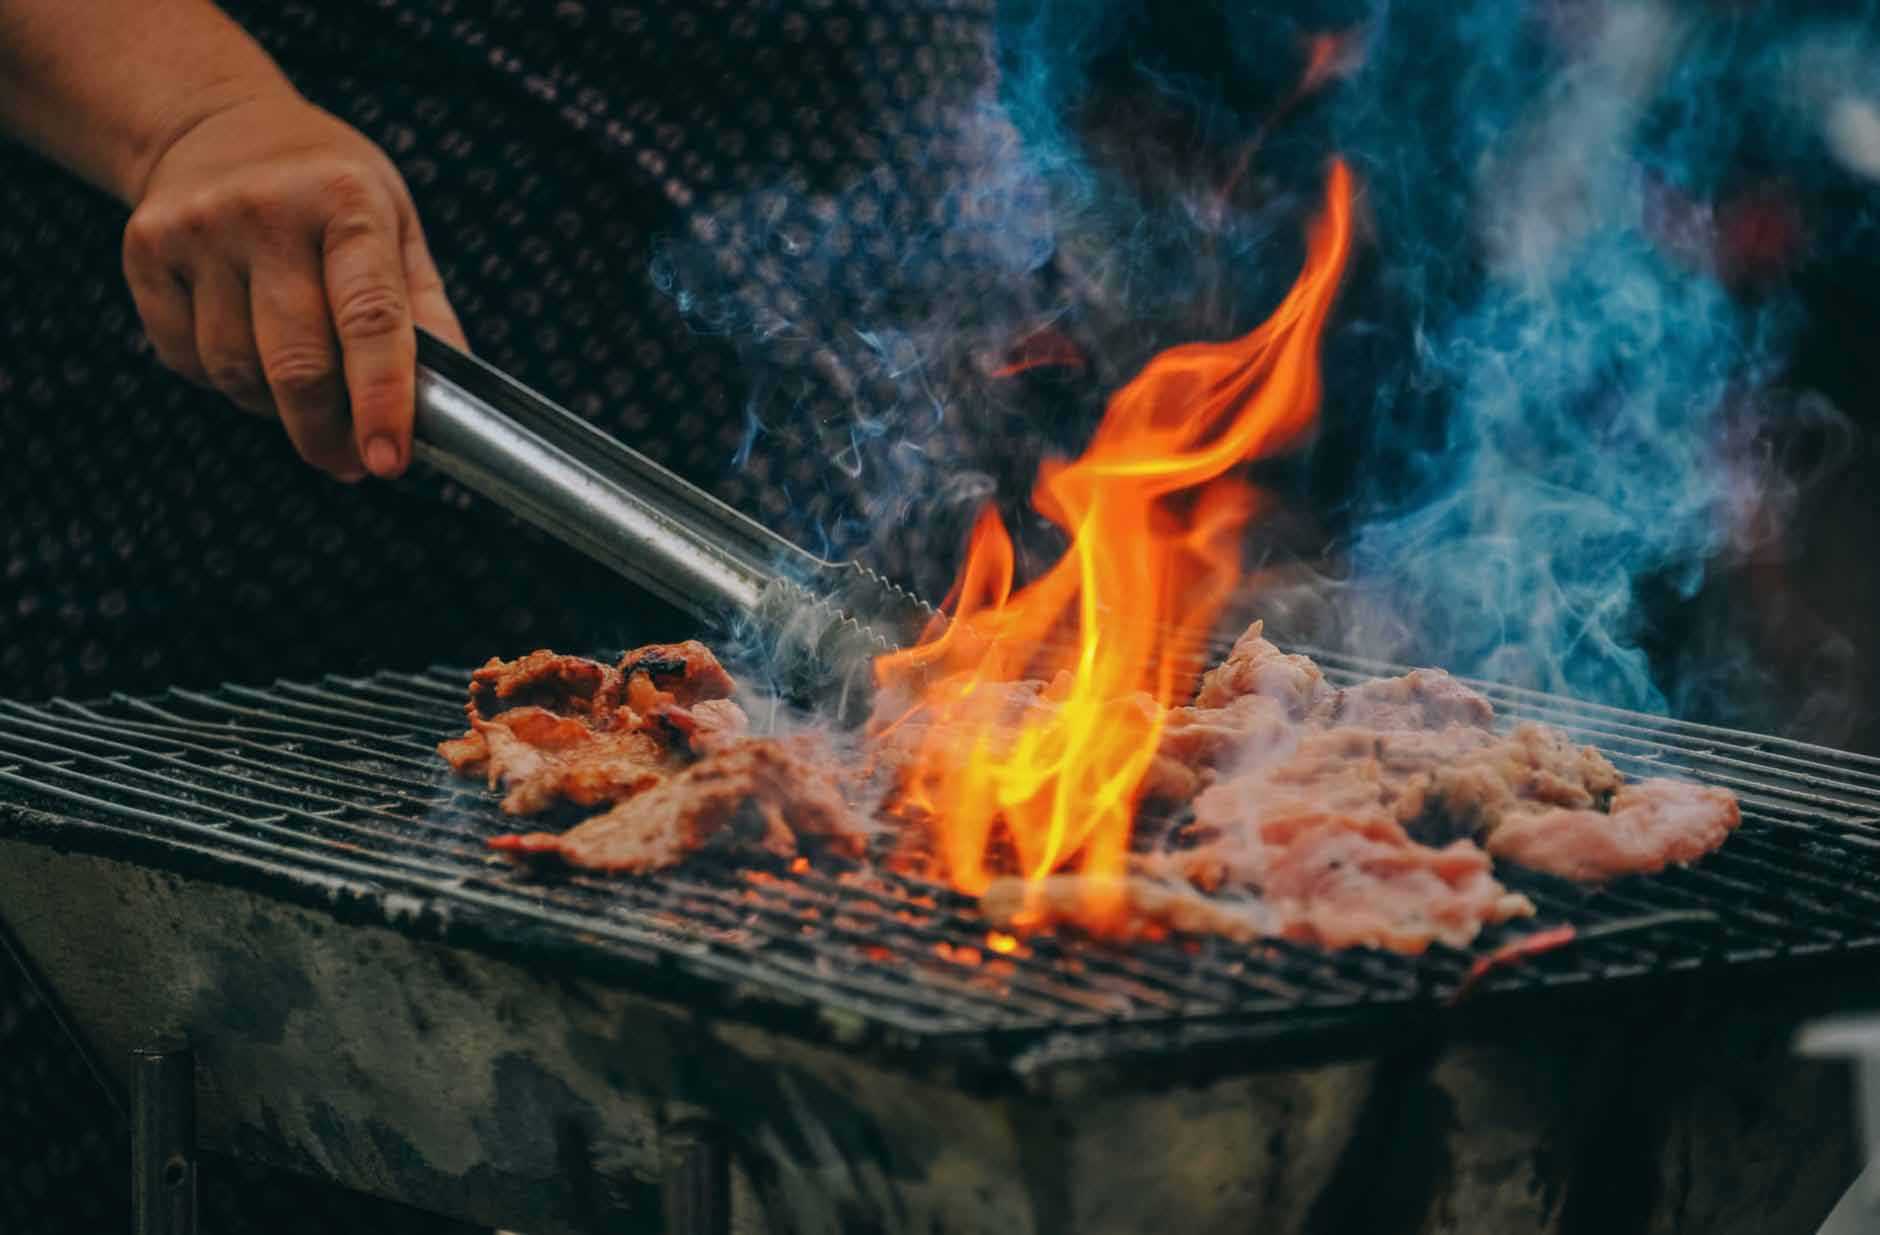 Fire Coming through Barbecue as Man with Tongs Turns The Meat